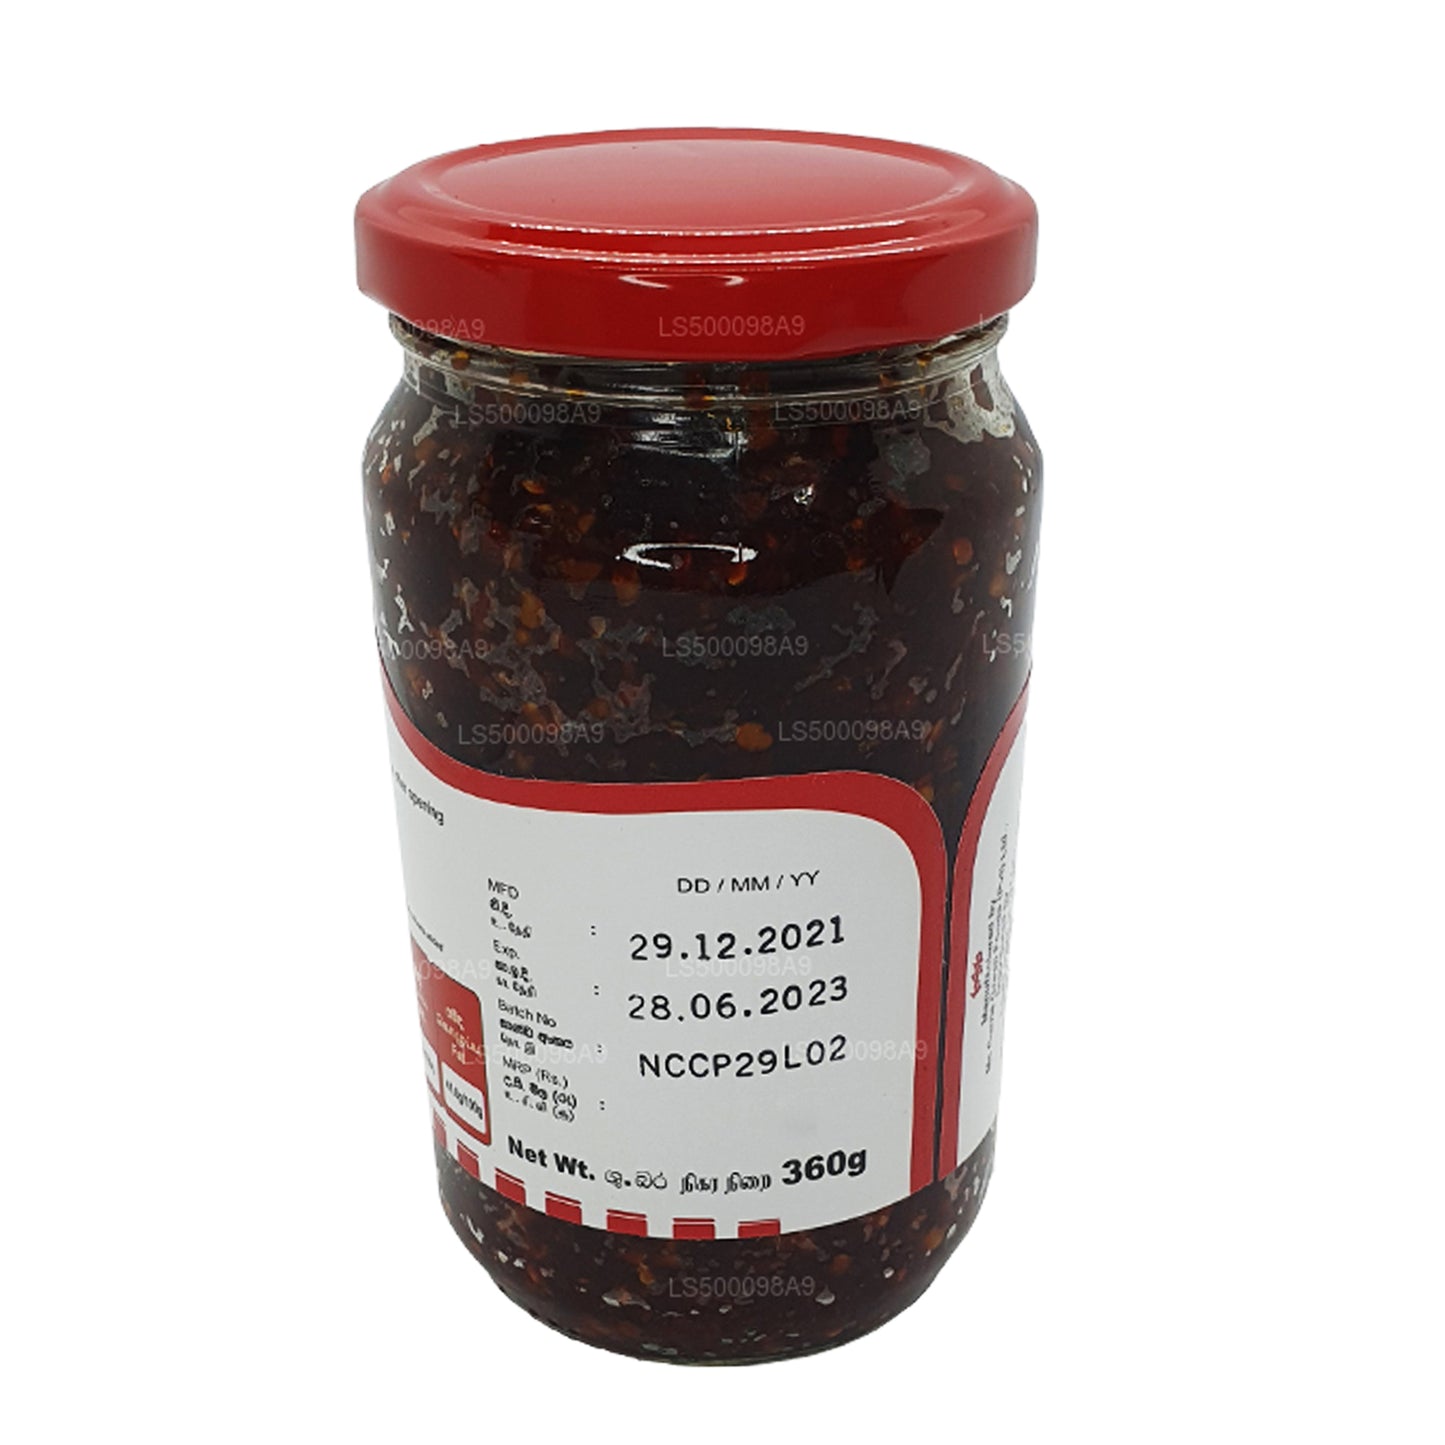 Mc Currie Chinese Chilli Paste